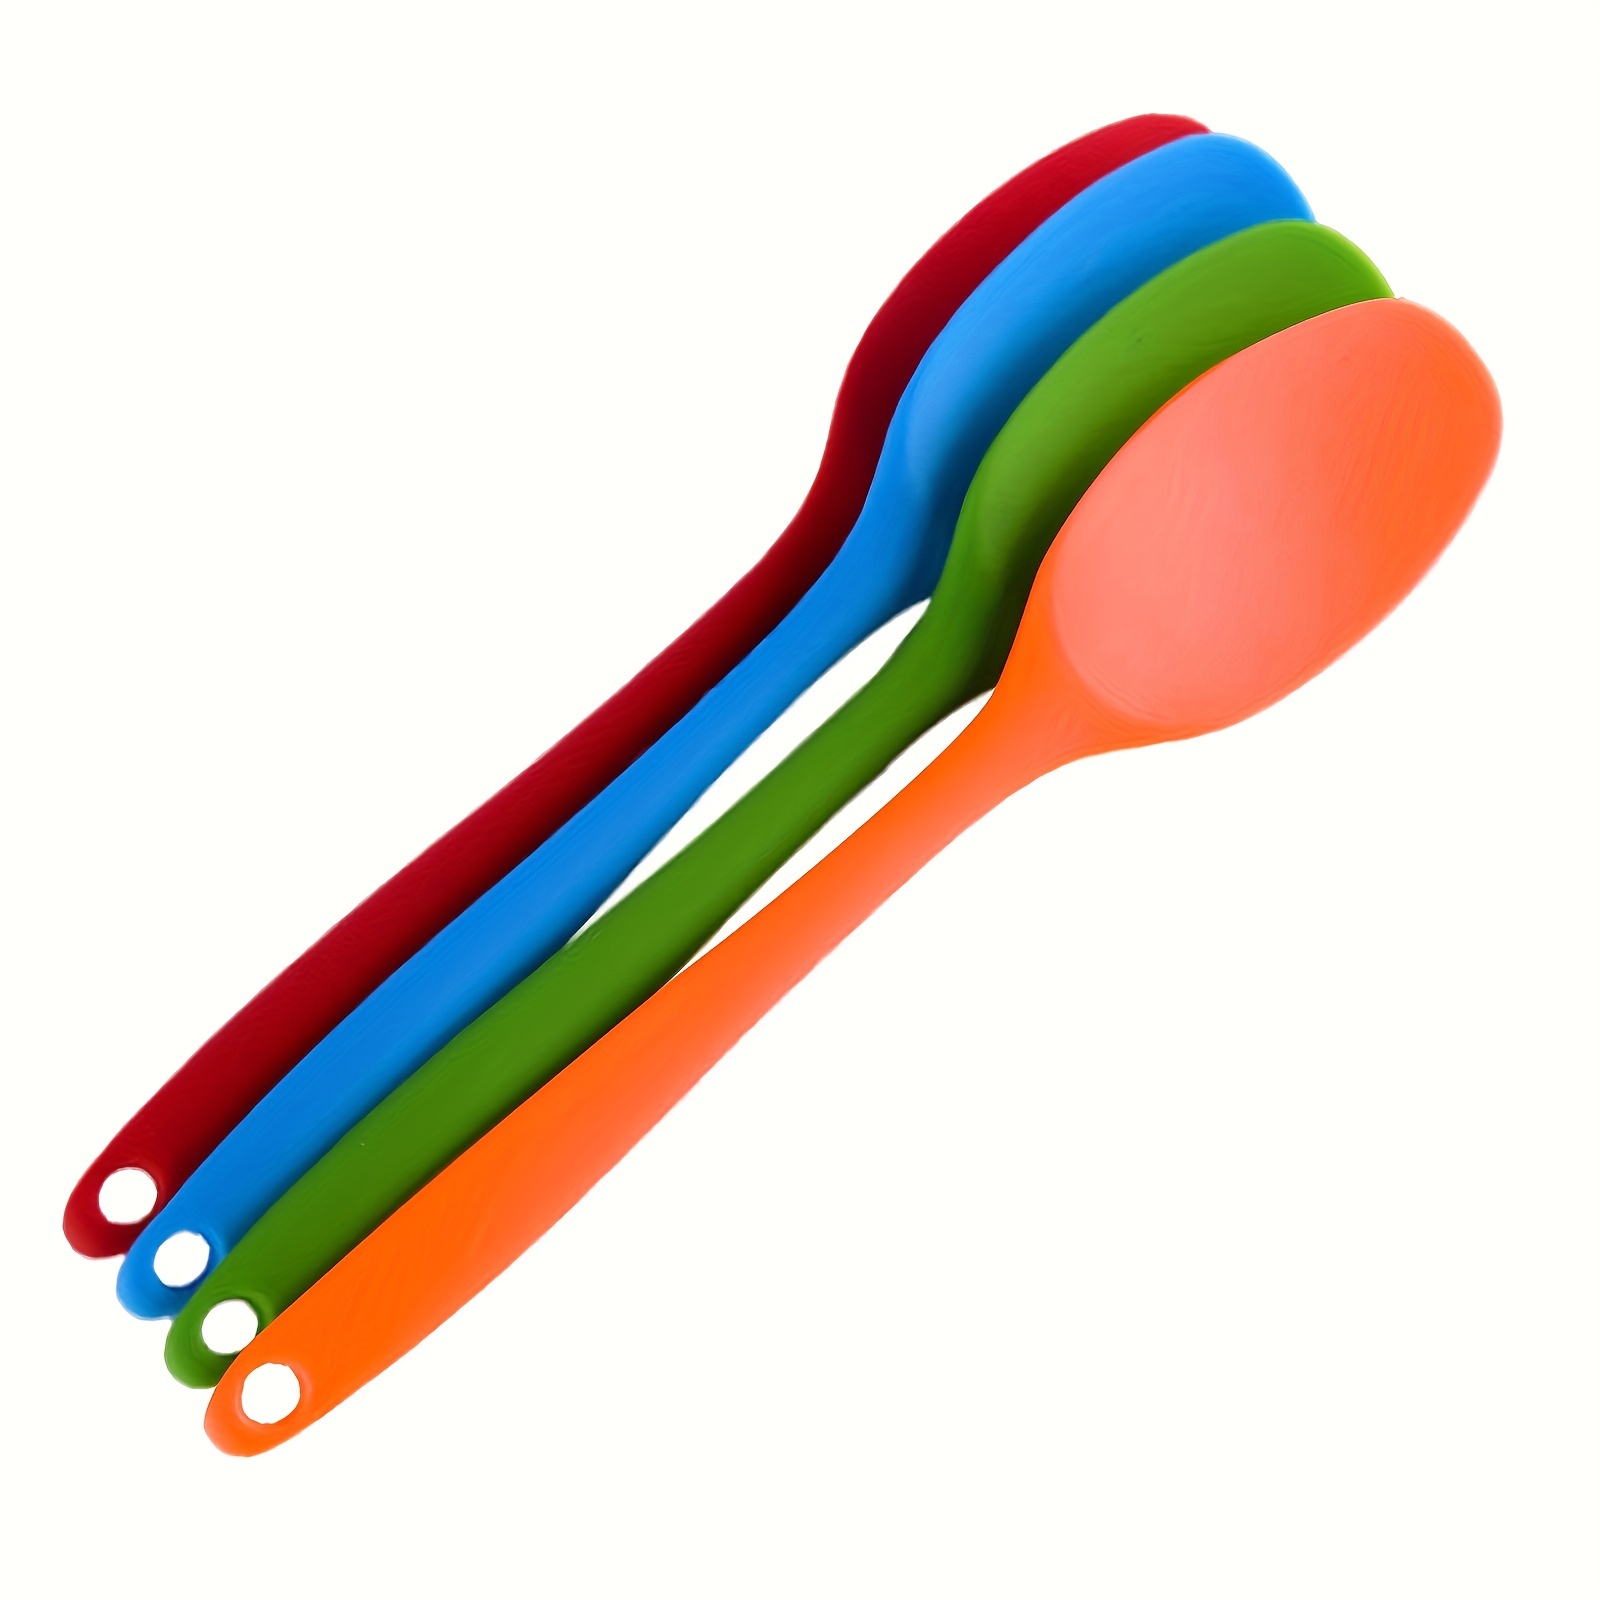 4 Pieces Silicone Spoons for Cooking, Large Silicone Mixing Spoon Set,  Nonstick Heat-Resistant Cooking Spoons, 4 Colors Kitchen Utensil Spoons for